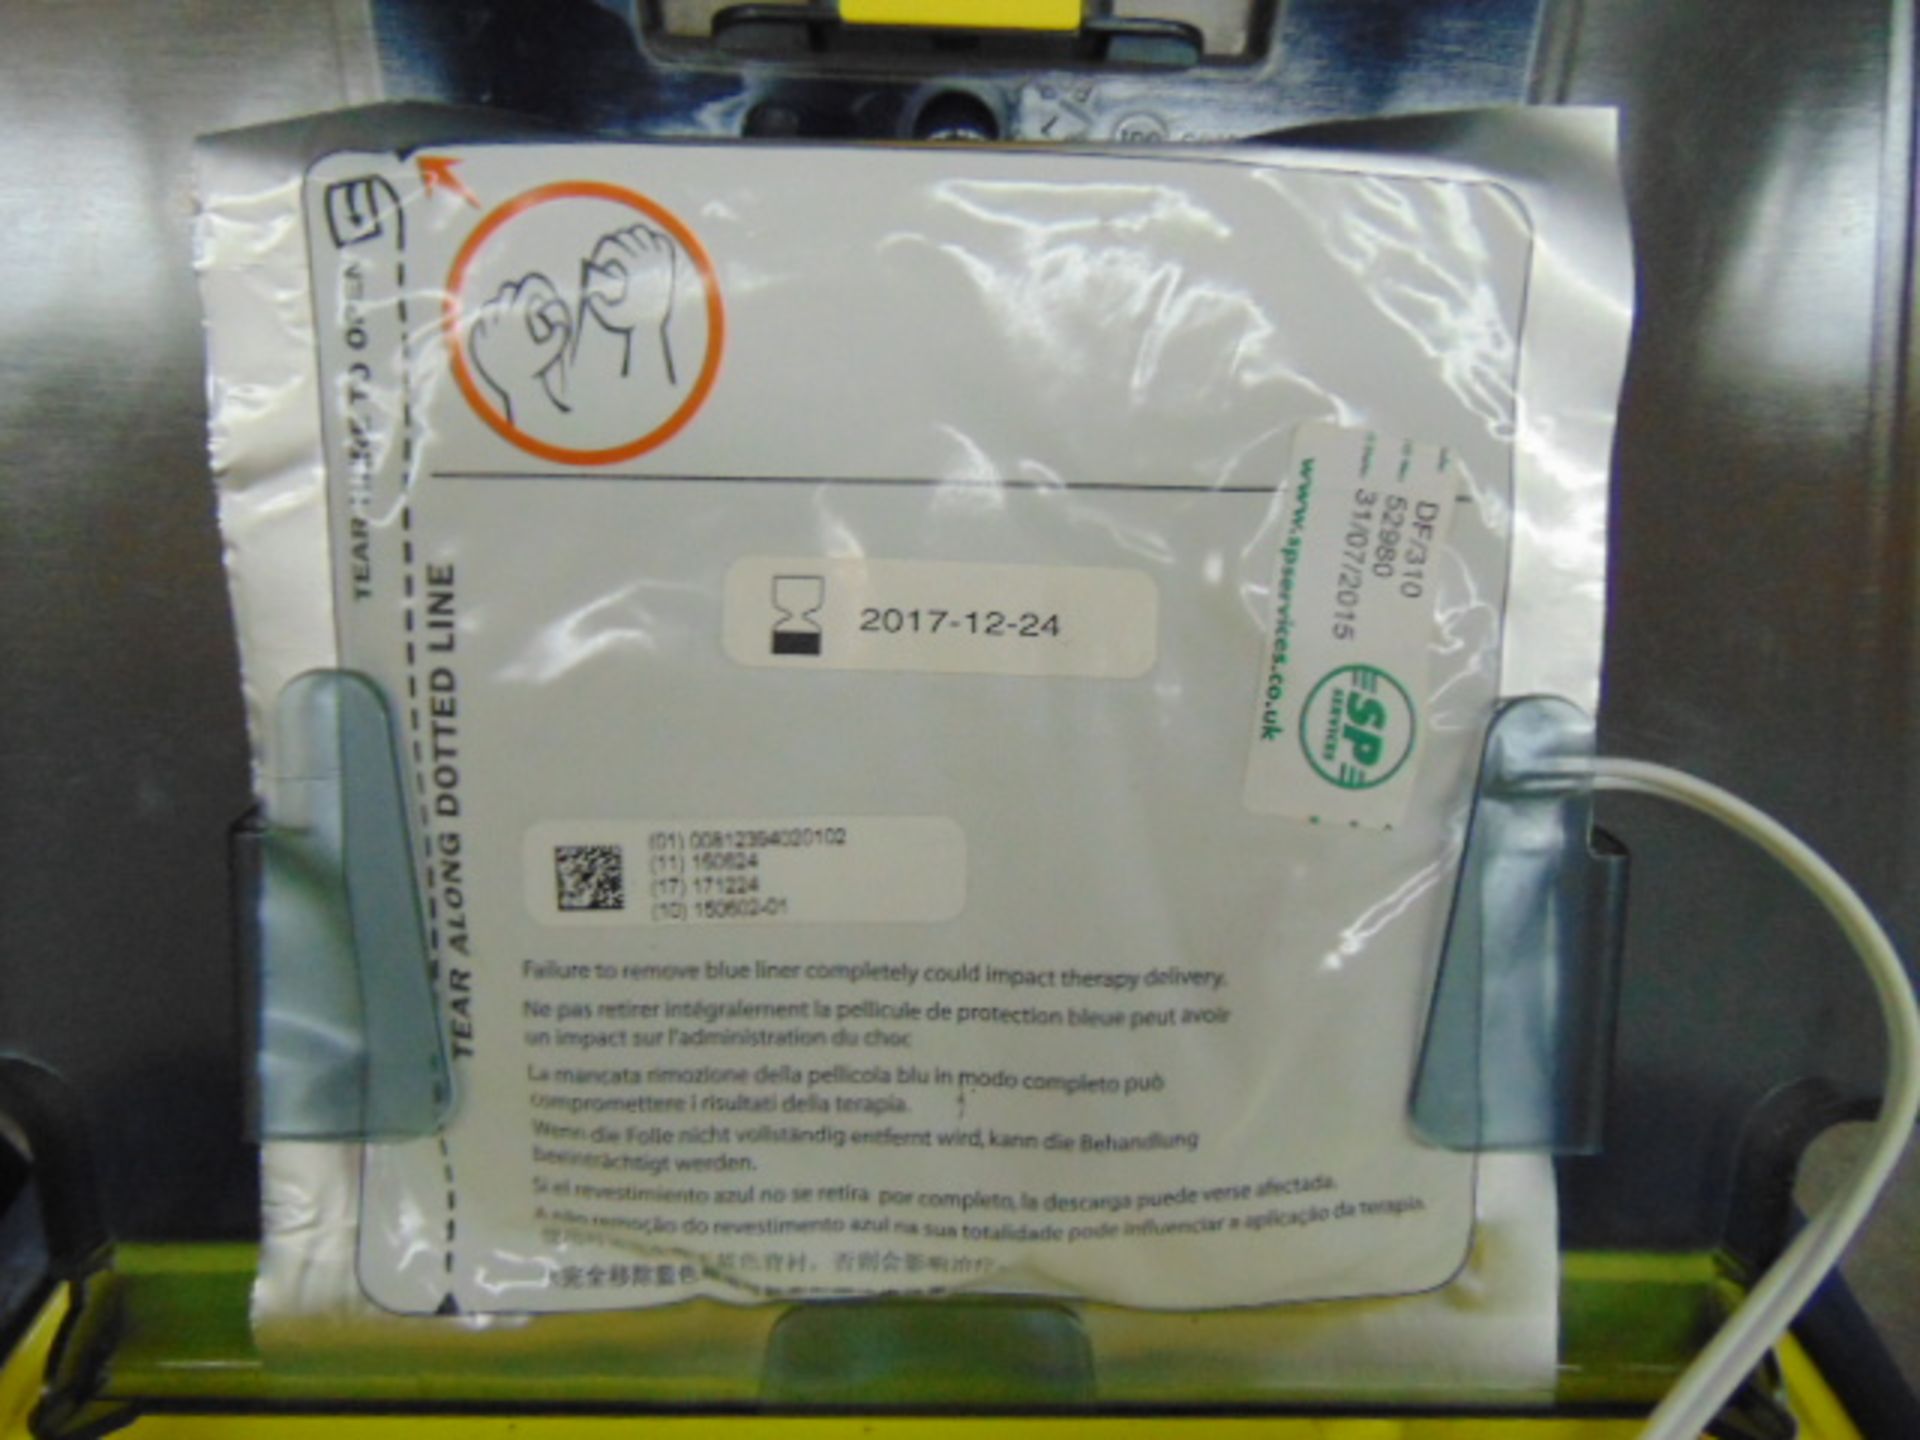 2 x Cardiac Science Powerheart G3 Automatic AED Automatic External Defribrillators - Image 10 of 12